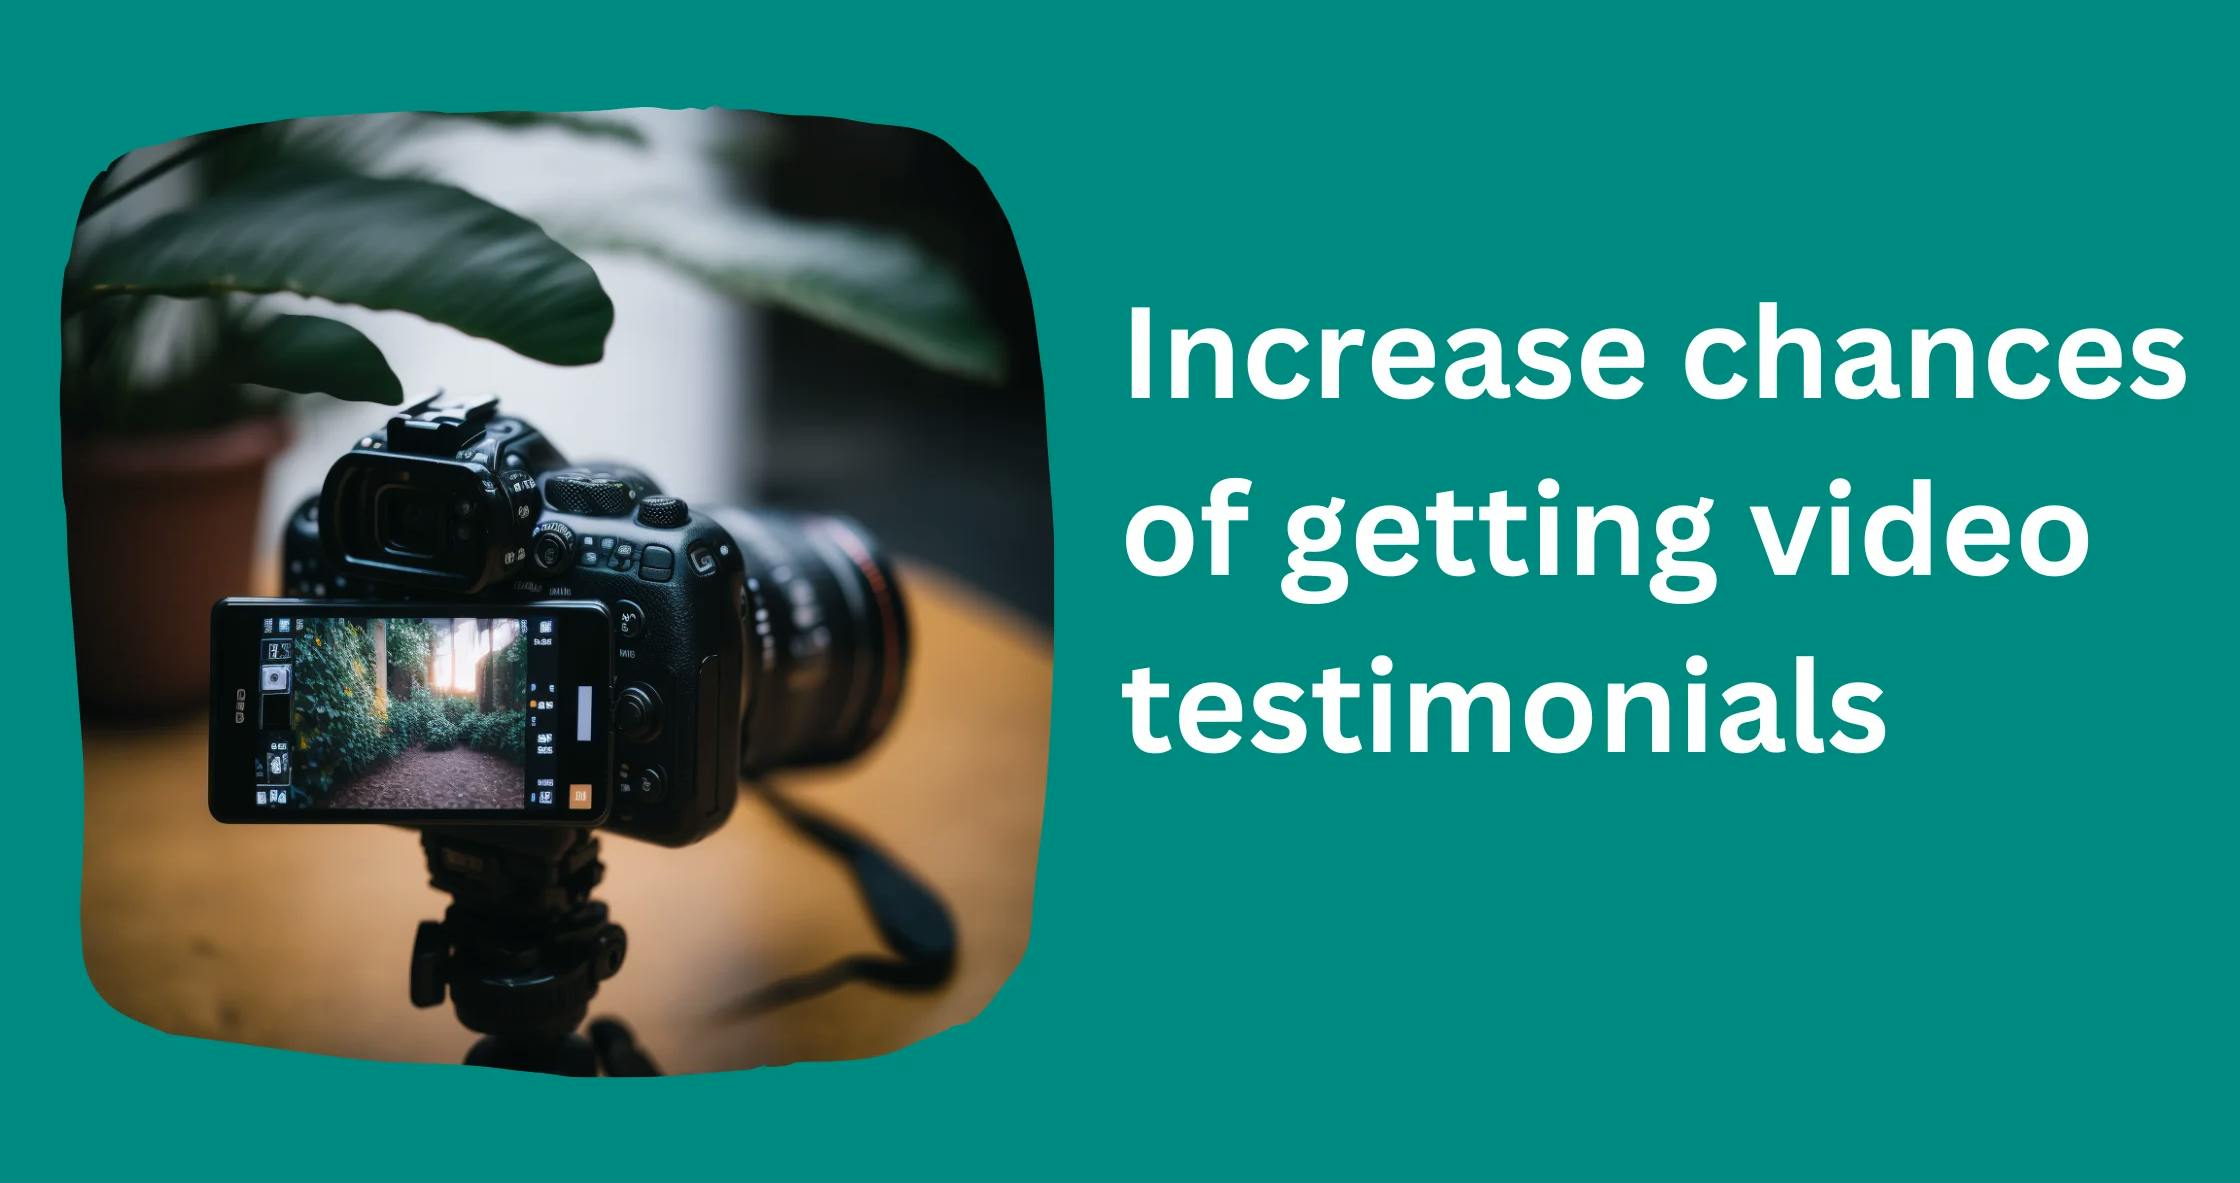 Get testimonial videos from customers